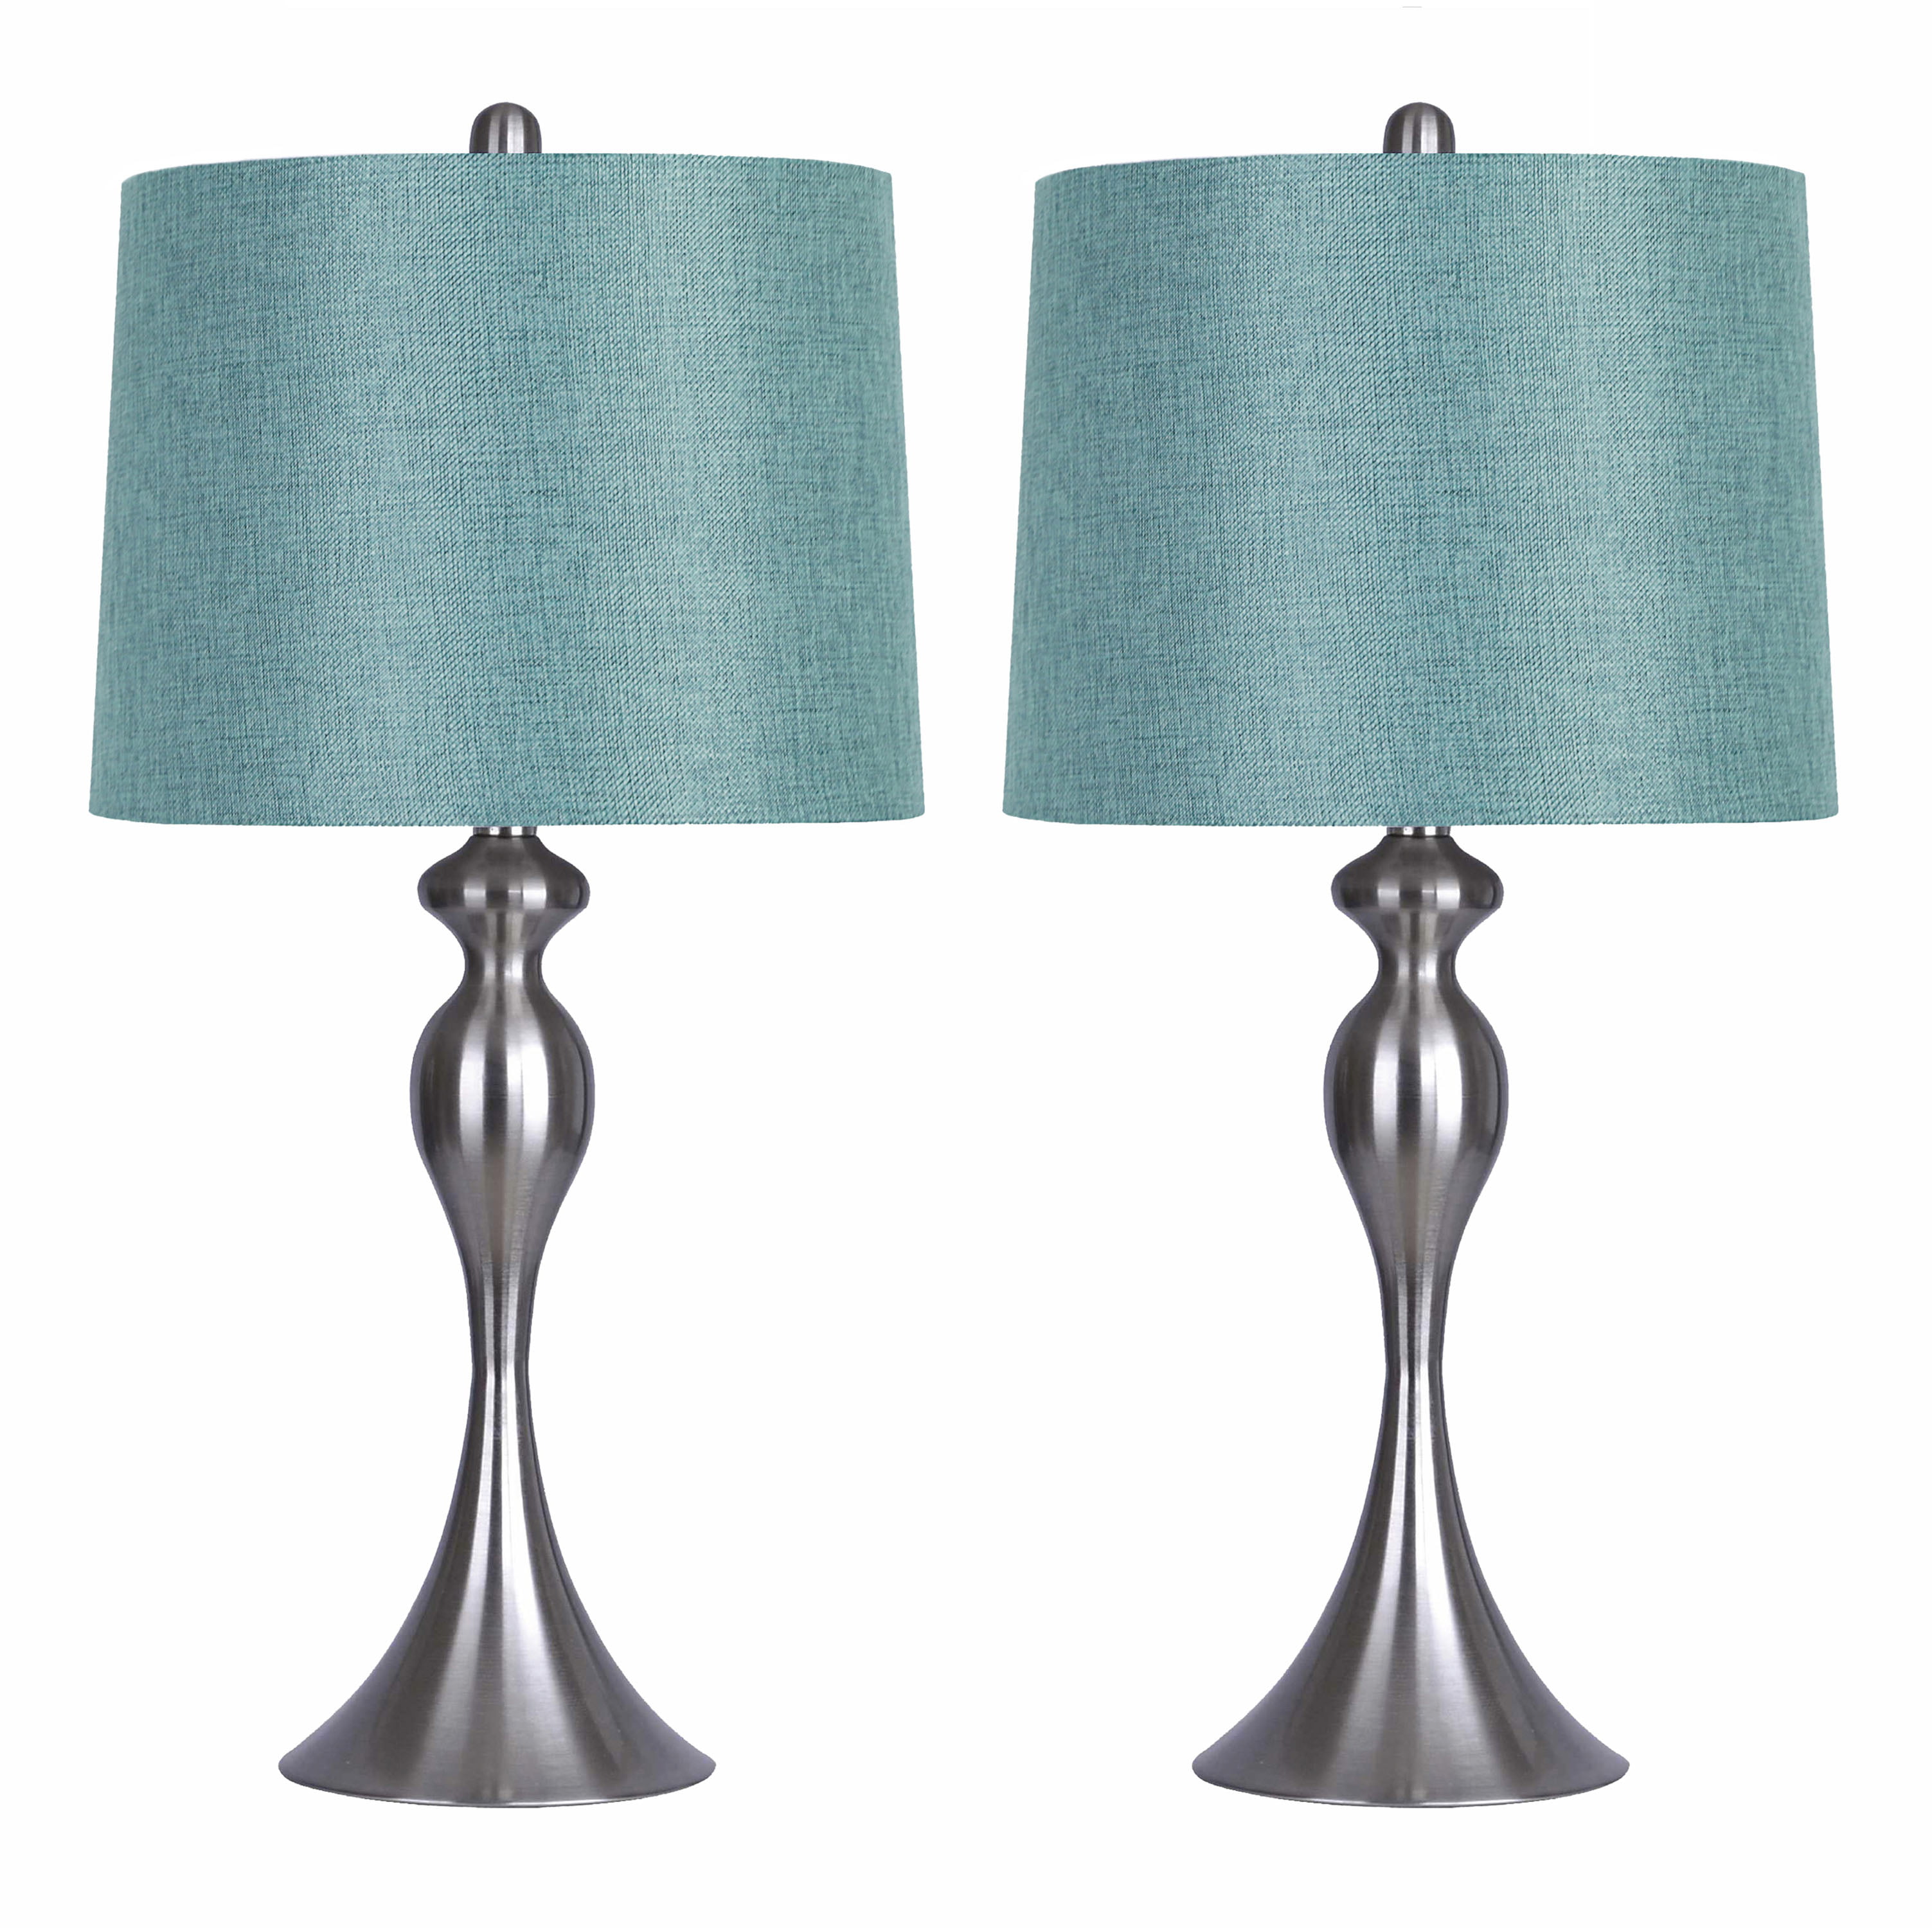 Grandview Gallery Table Lamps With, How Much Is Table Lamp Shade